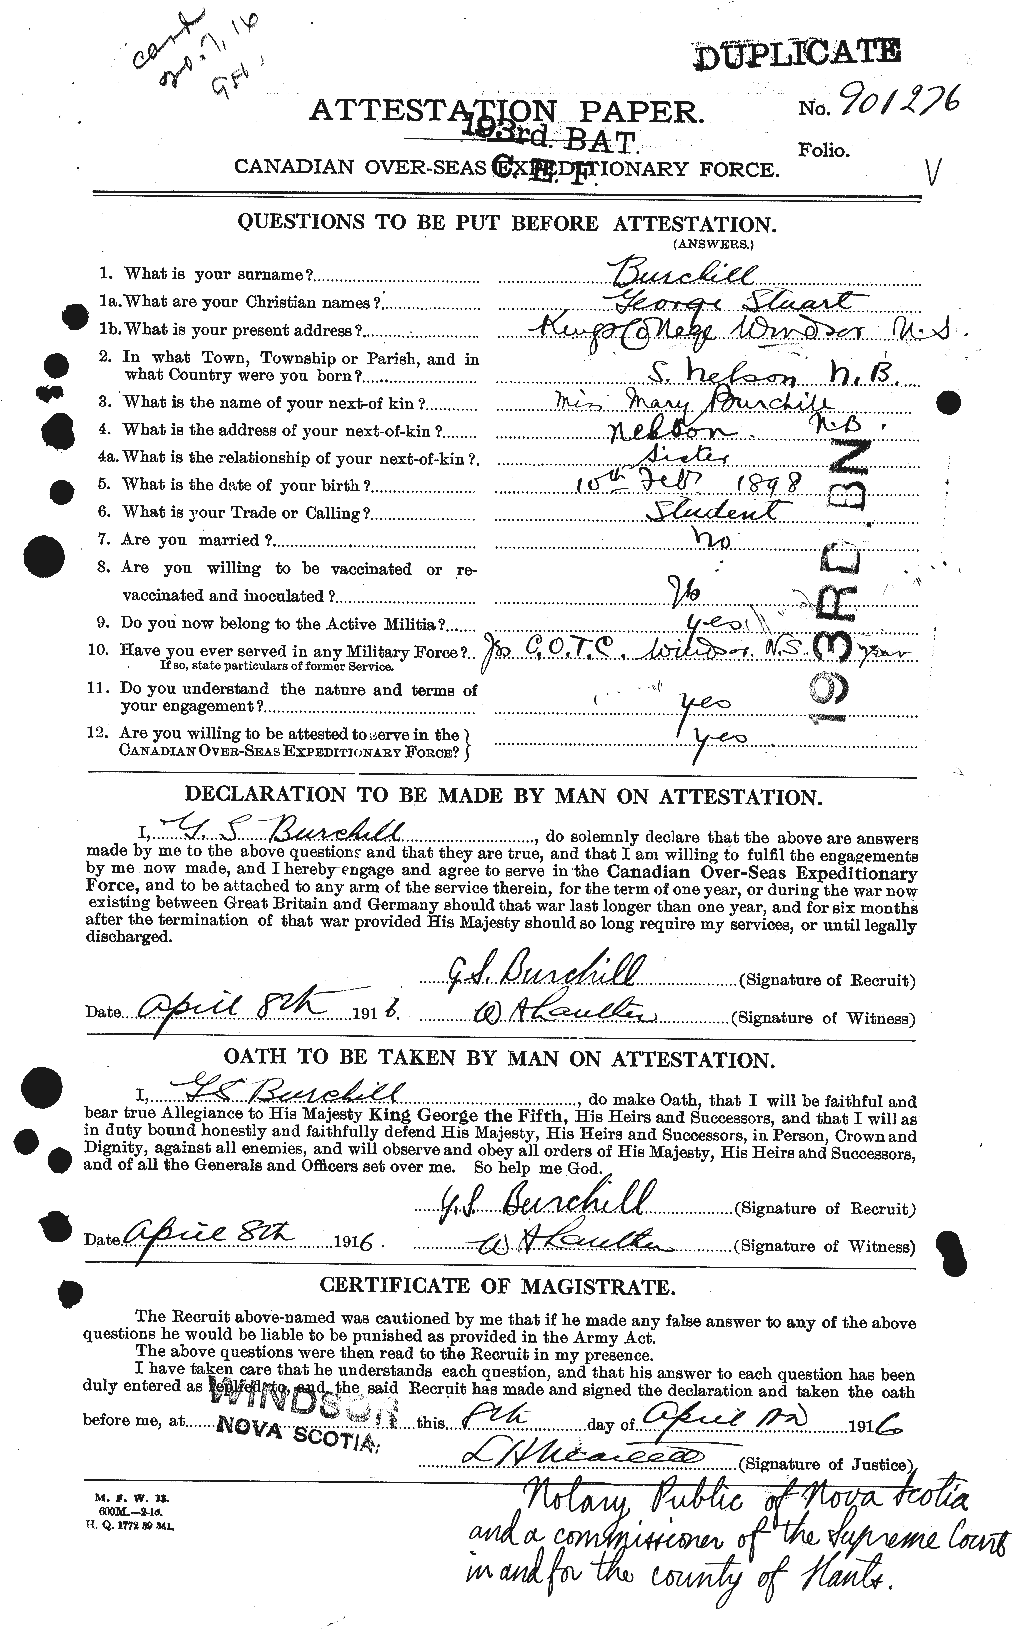 Personnel Records of the First World War - CEF 273179a